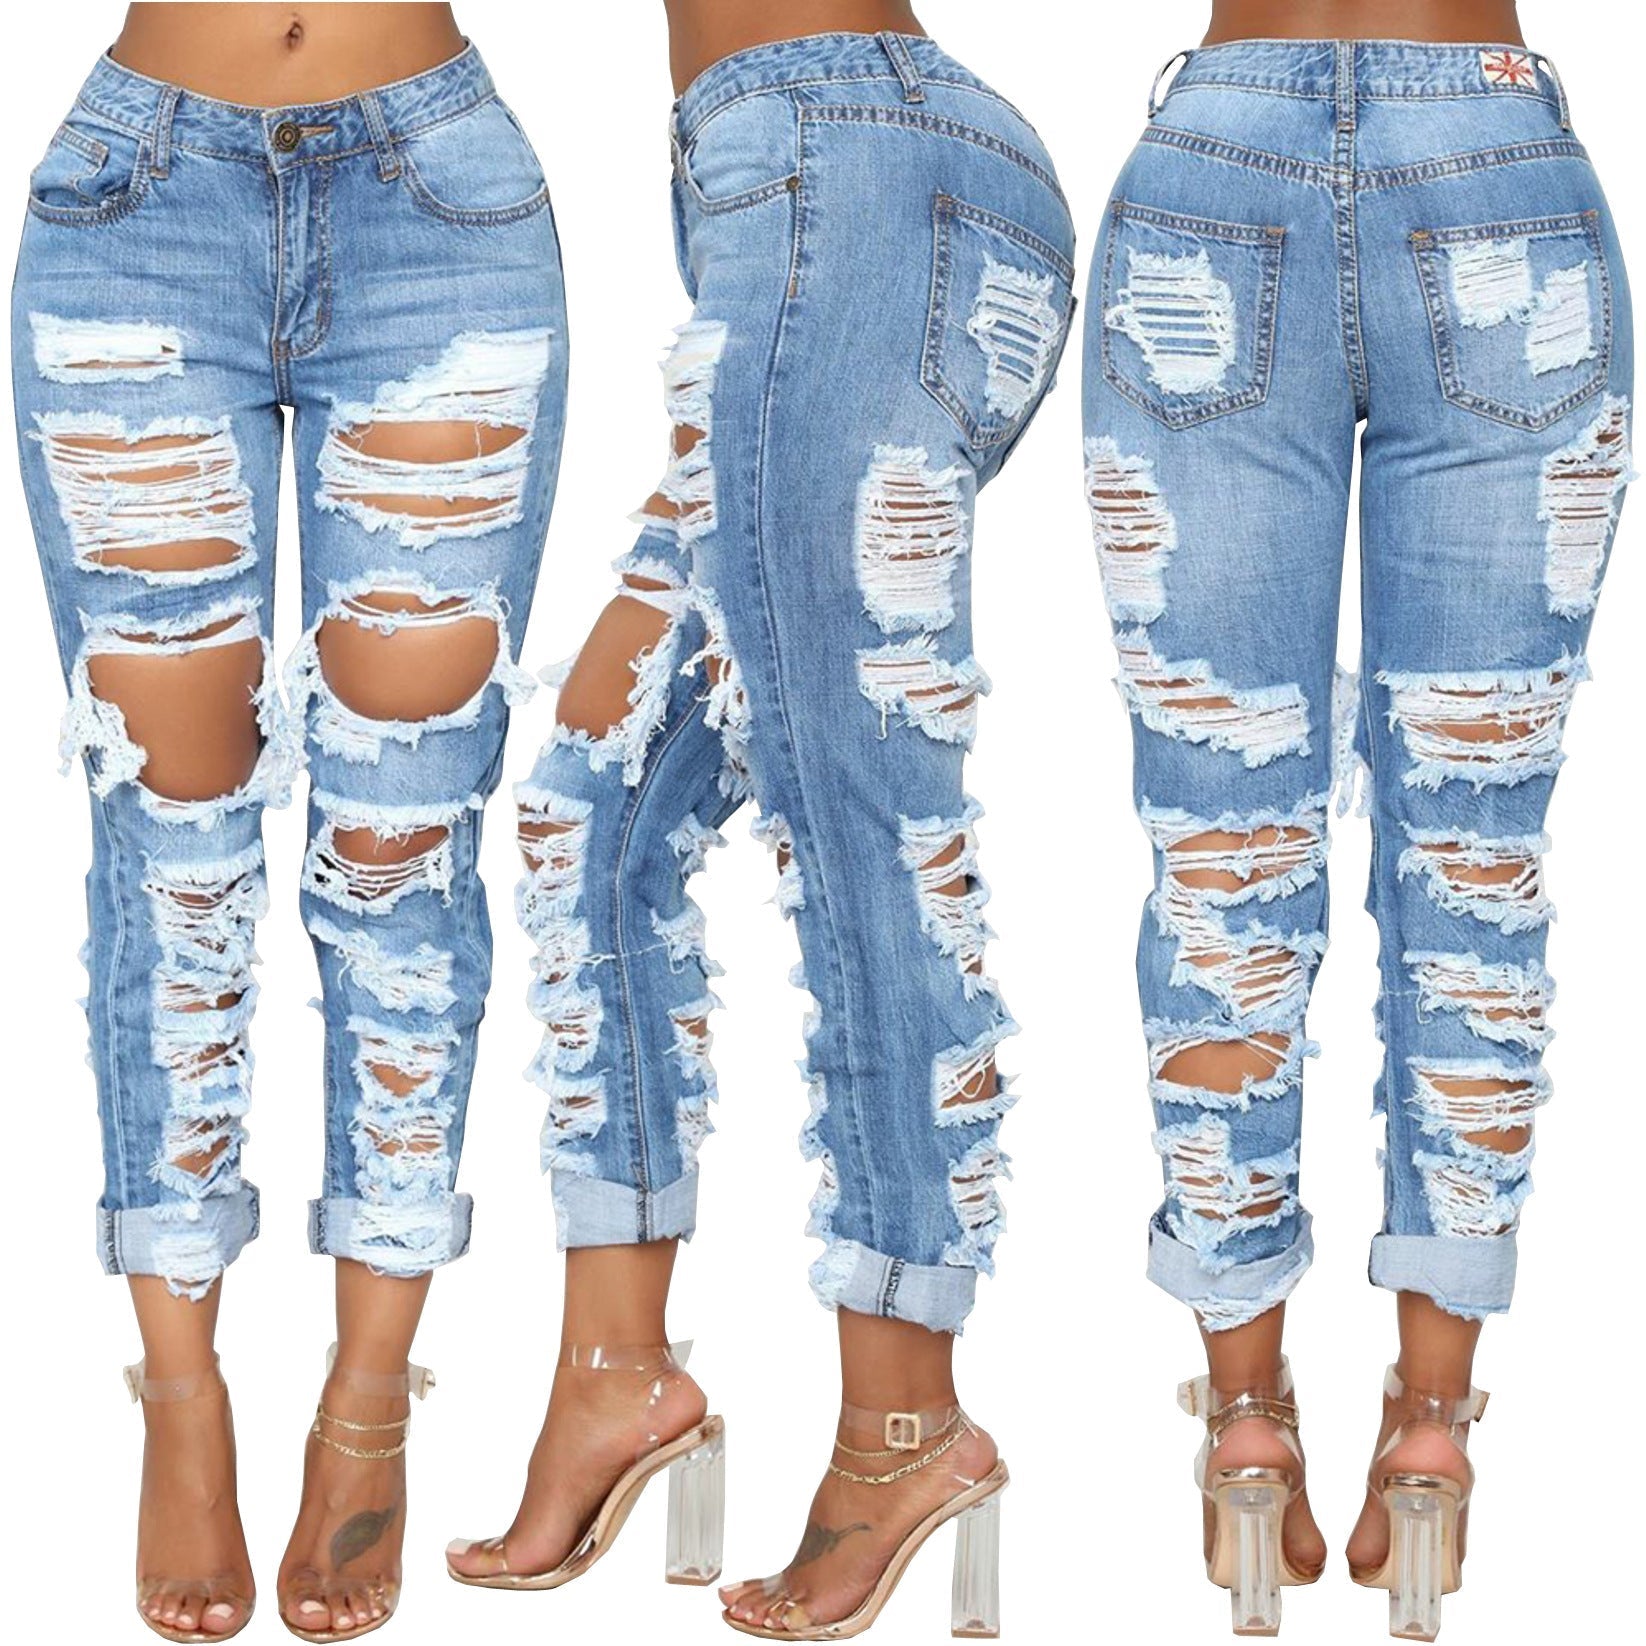 Personalized pierced beggar elastic jeans before and after fashion Blue